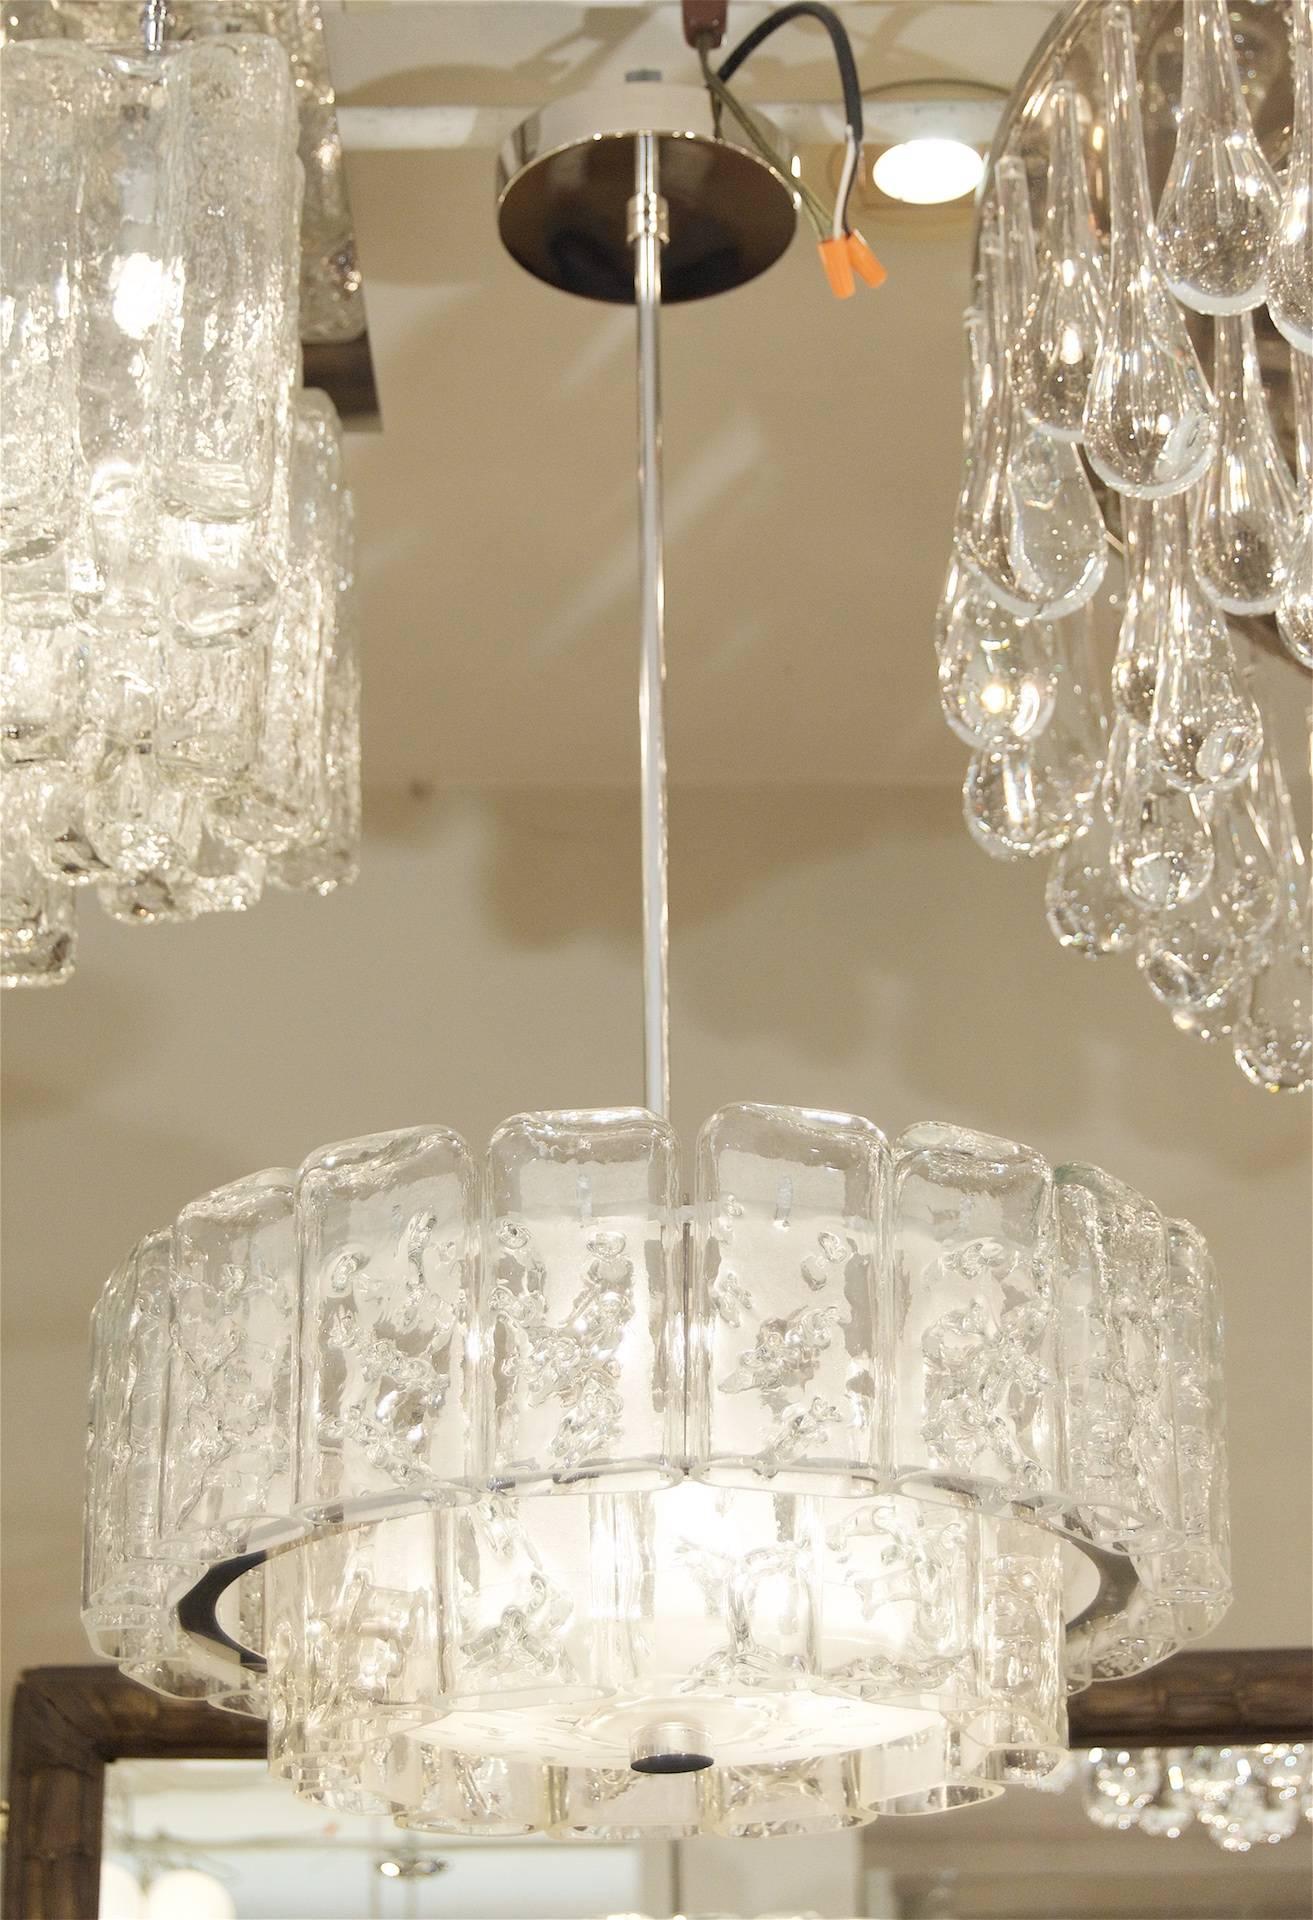 This fantastic and dramatic Doria chandelier is comprised of two tiers of individual glass pieces, with a central glass diffuser. The glass has the appearance of ice, each piece having internal random veining and a frosted reverse side. A thin